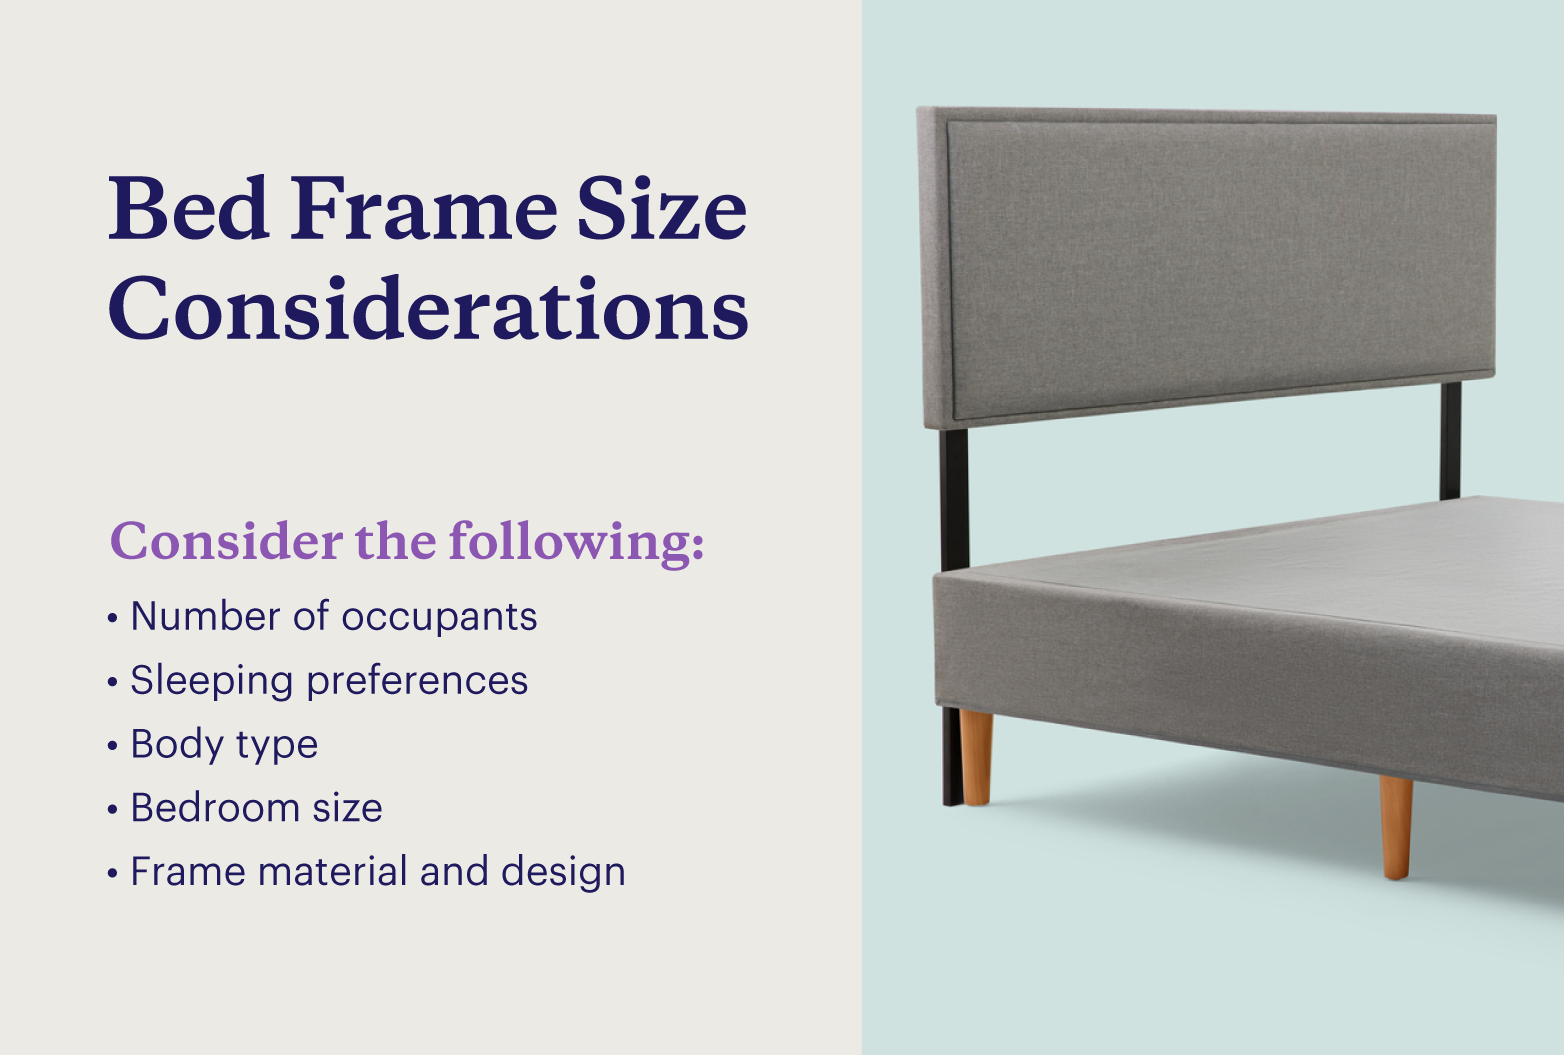 Graphic shows five factors to consider when selecting bed frame size with a photo of the Purple Bed Frame.